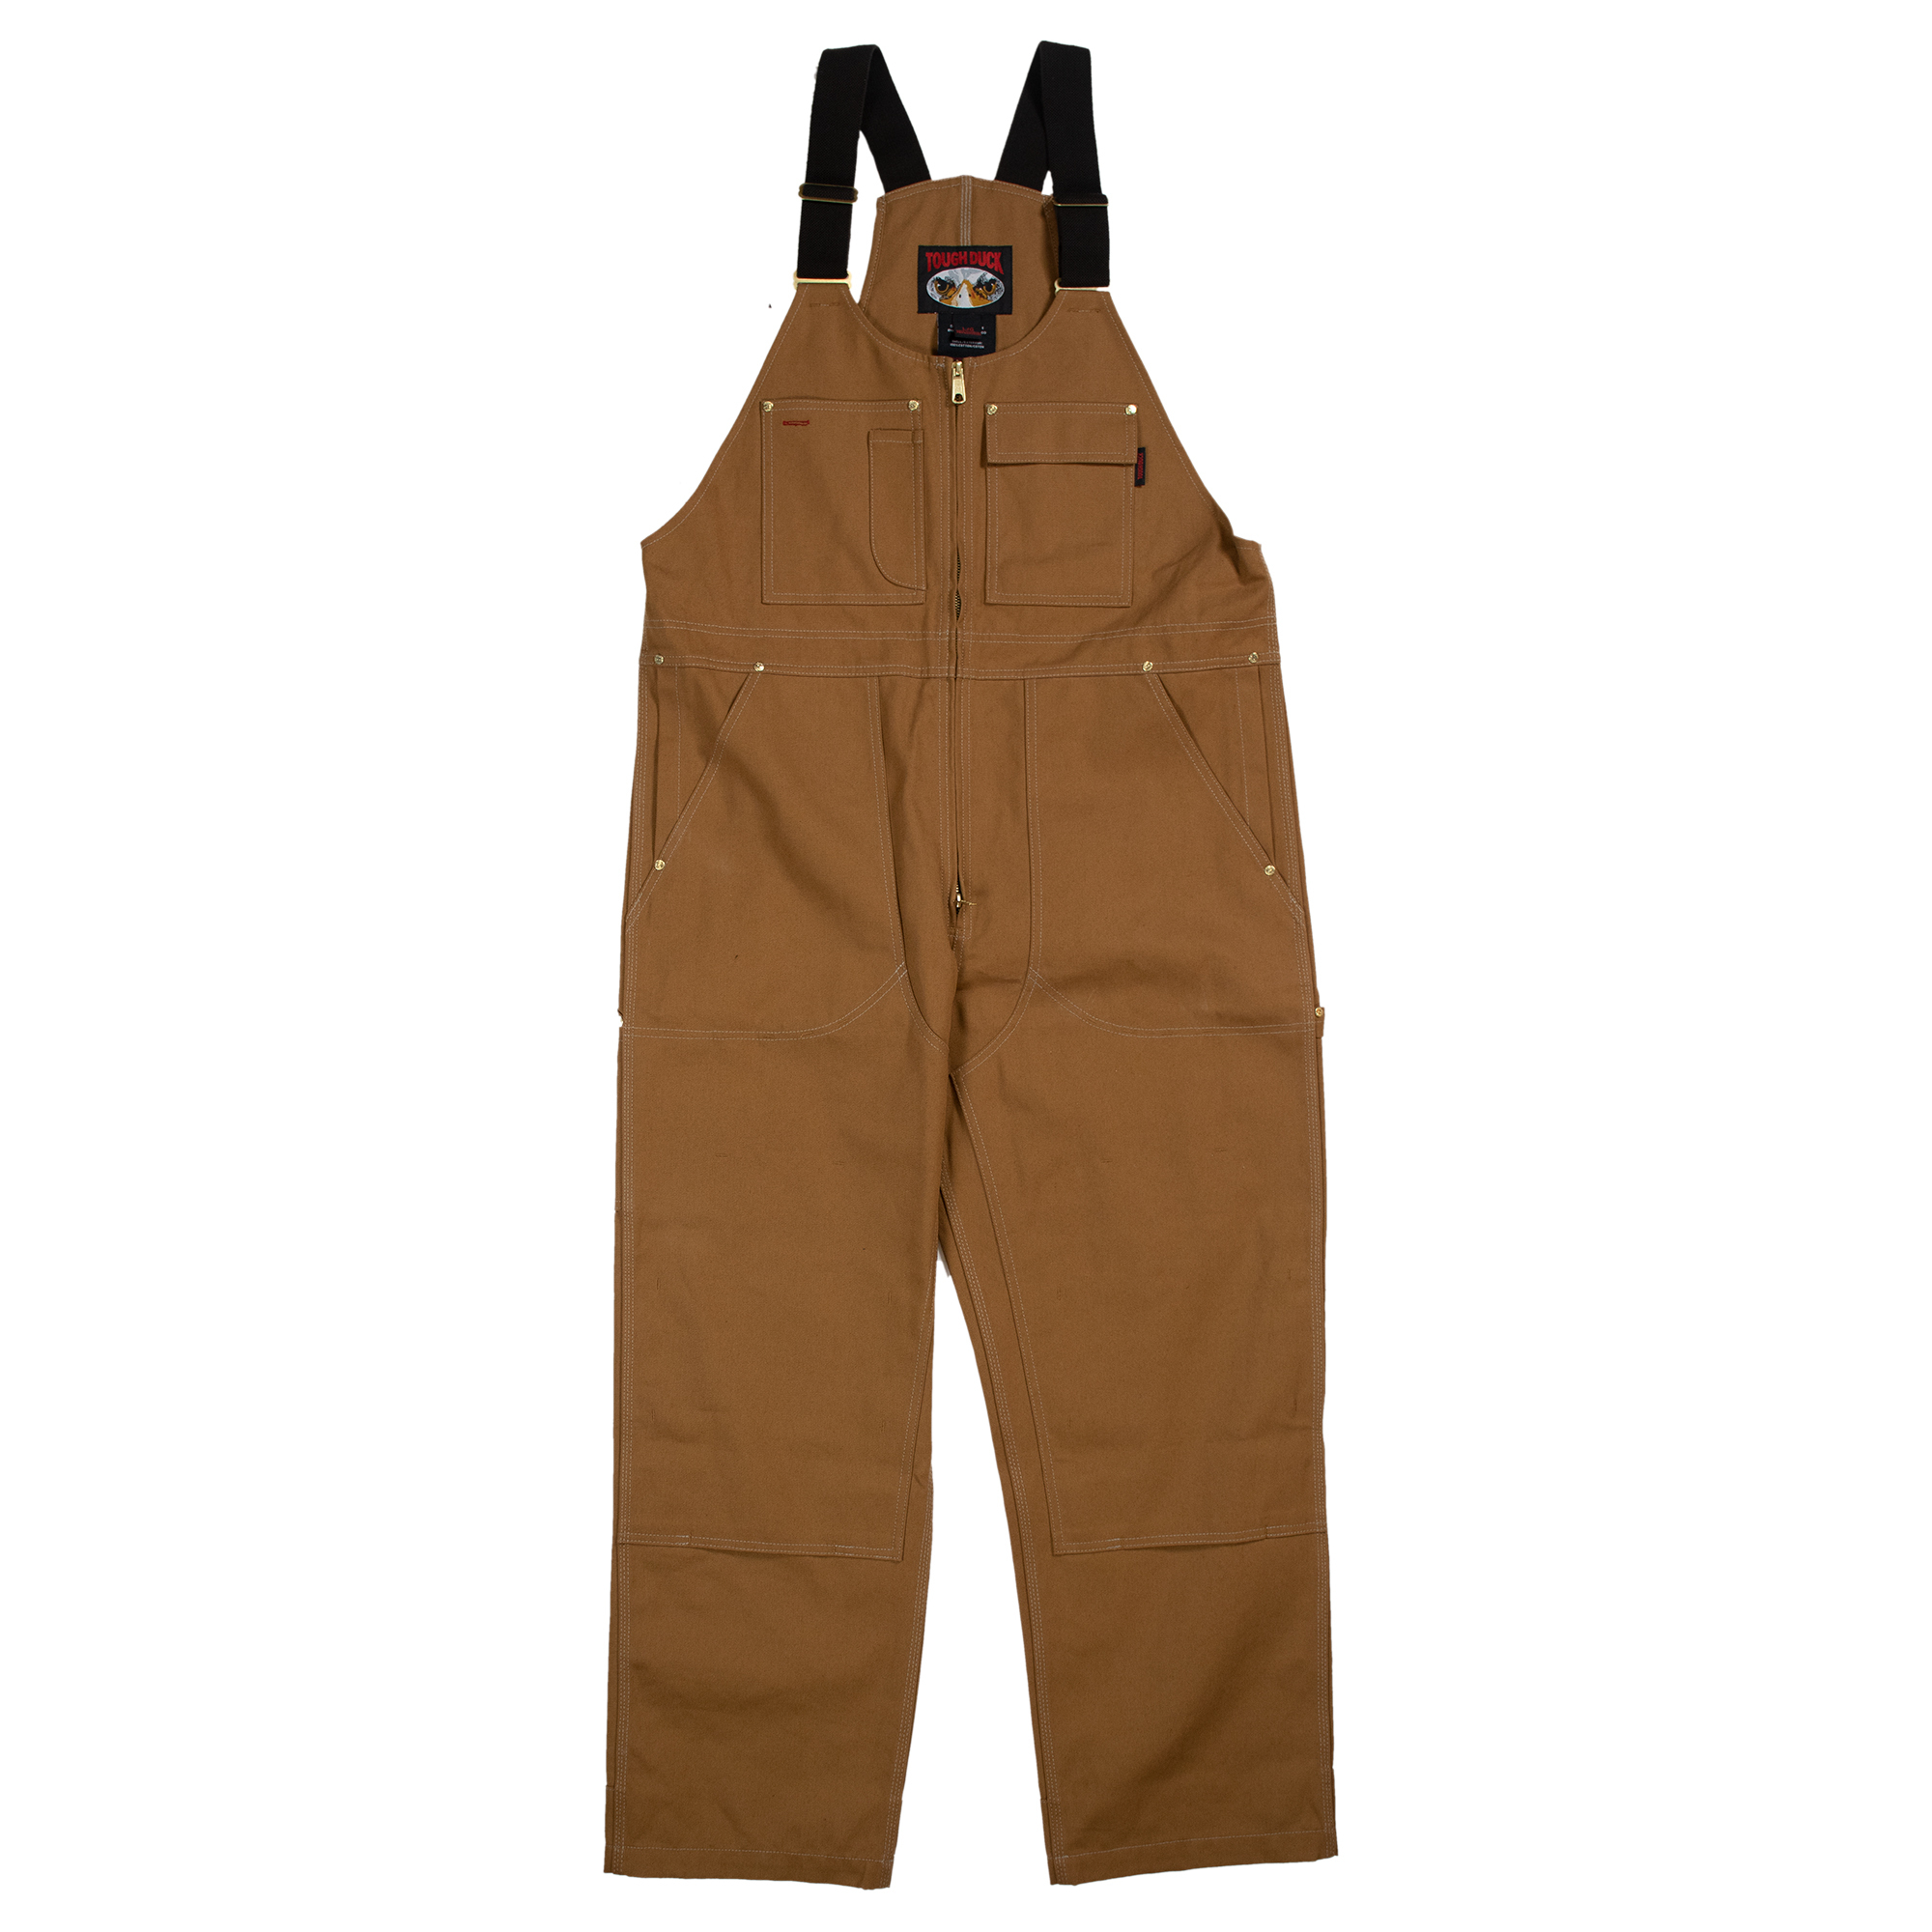 Tough Duck, Deluxe Unlined Bib Overall, Size L, Color Brown, Model WB041